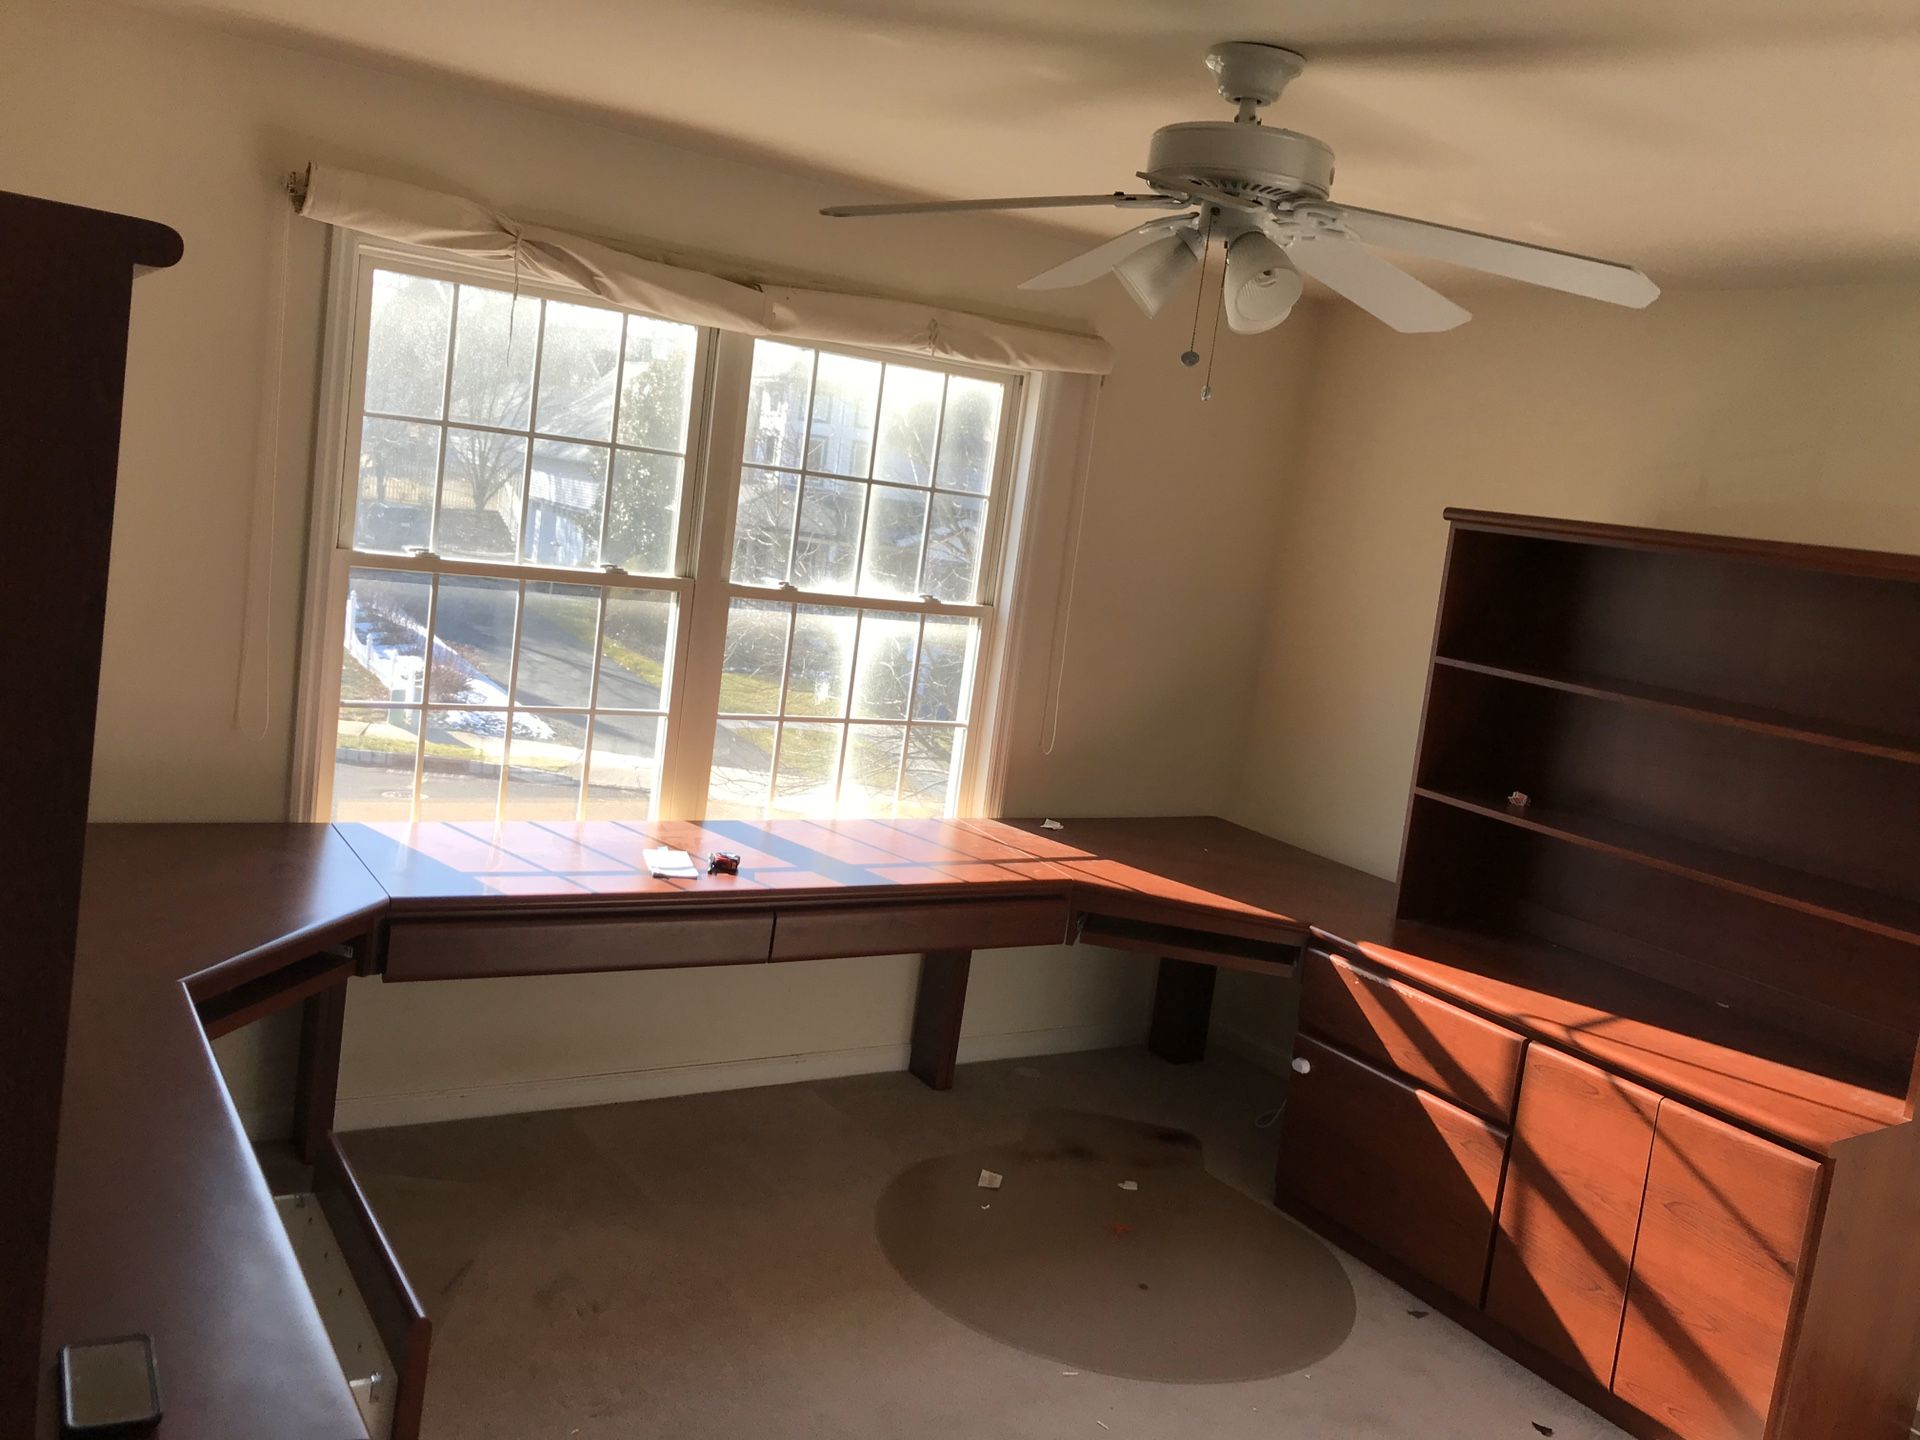 Cherry wood custom office/study desk with bookcases